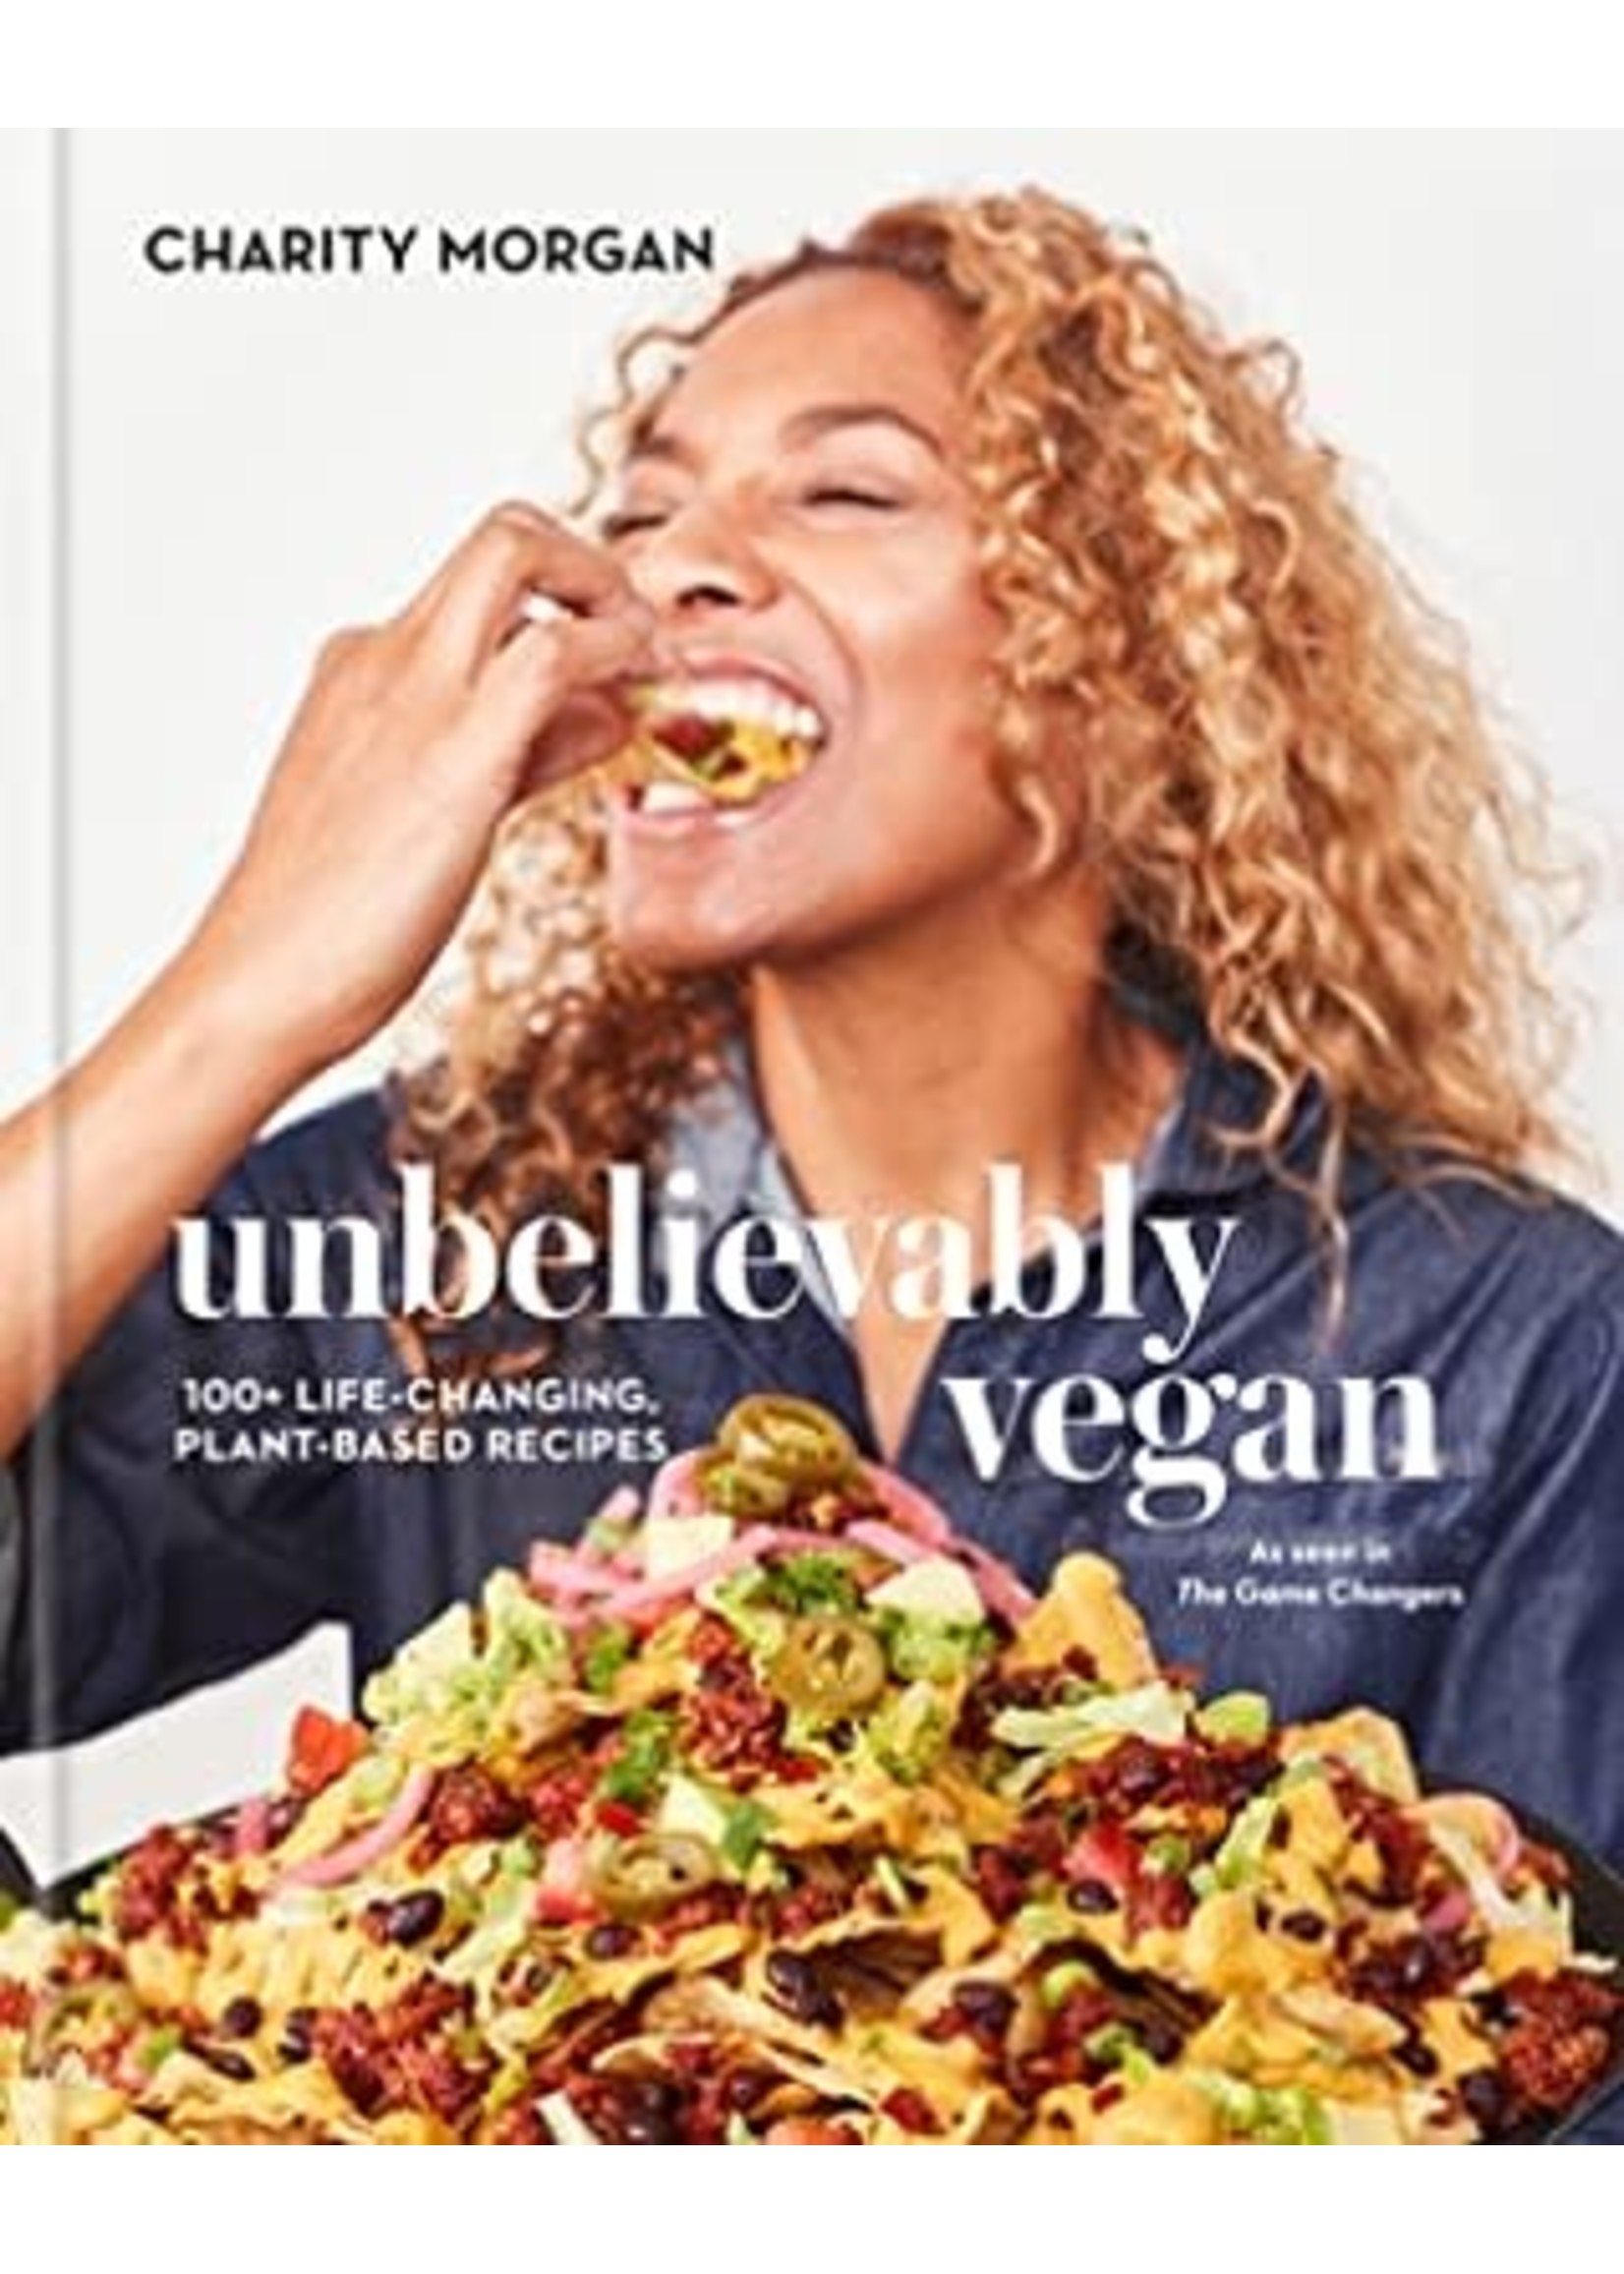 Unbelievably Vegan: More Than 100 Big, Bold, Game-Changing Plegan (Plant-Based + Vegan) Recipes: A Cookbook by Charity Morgan